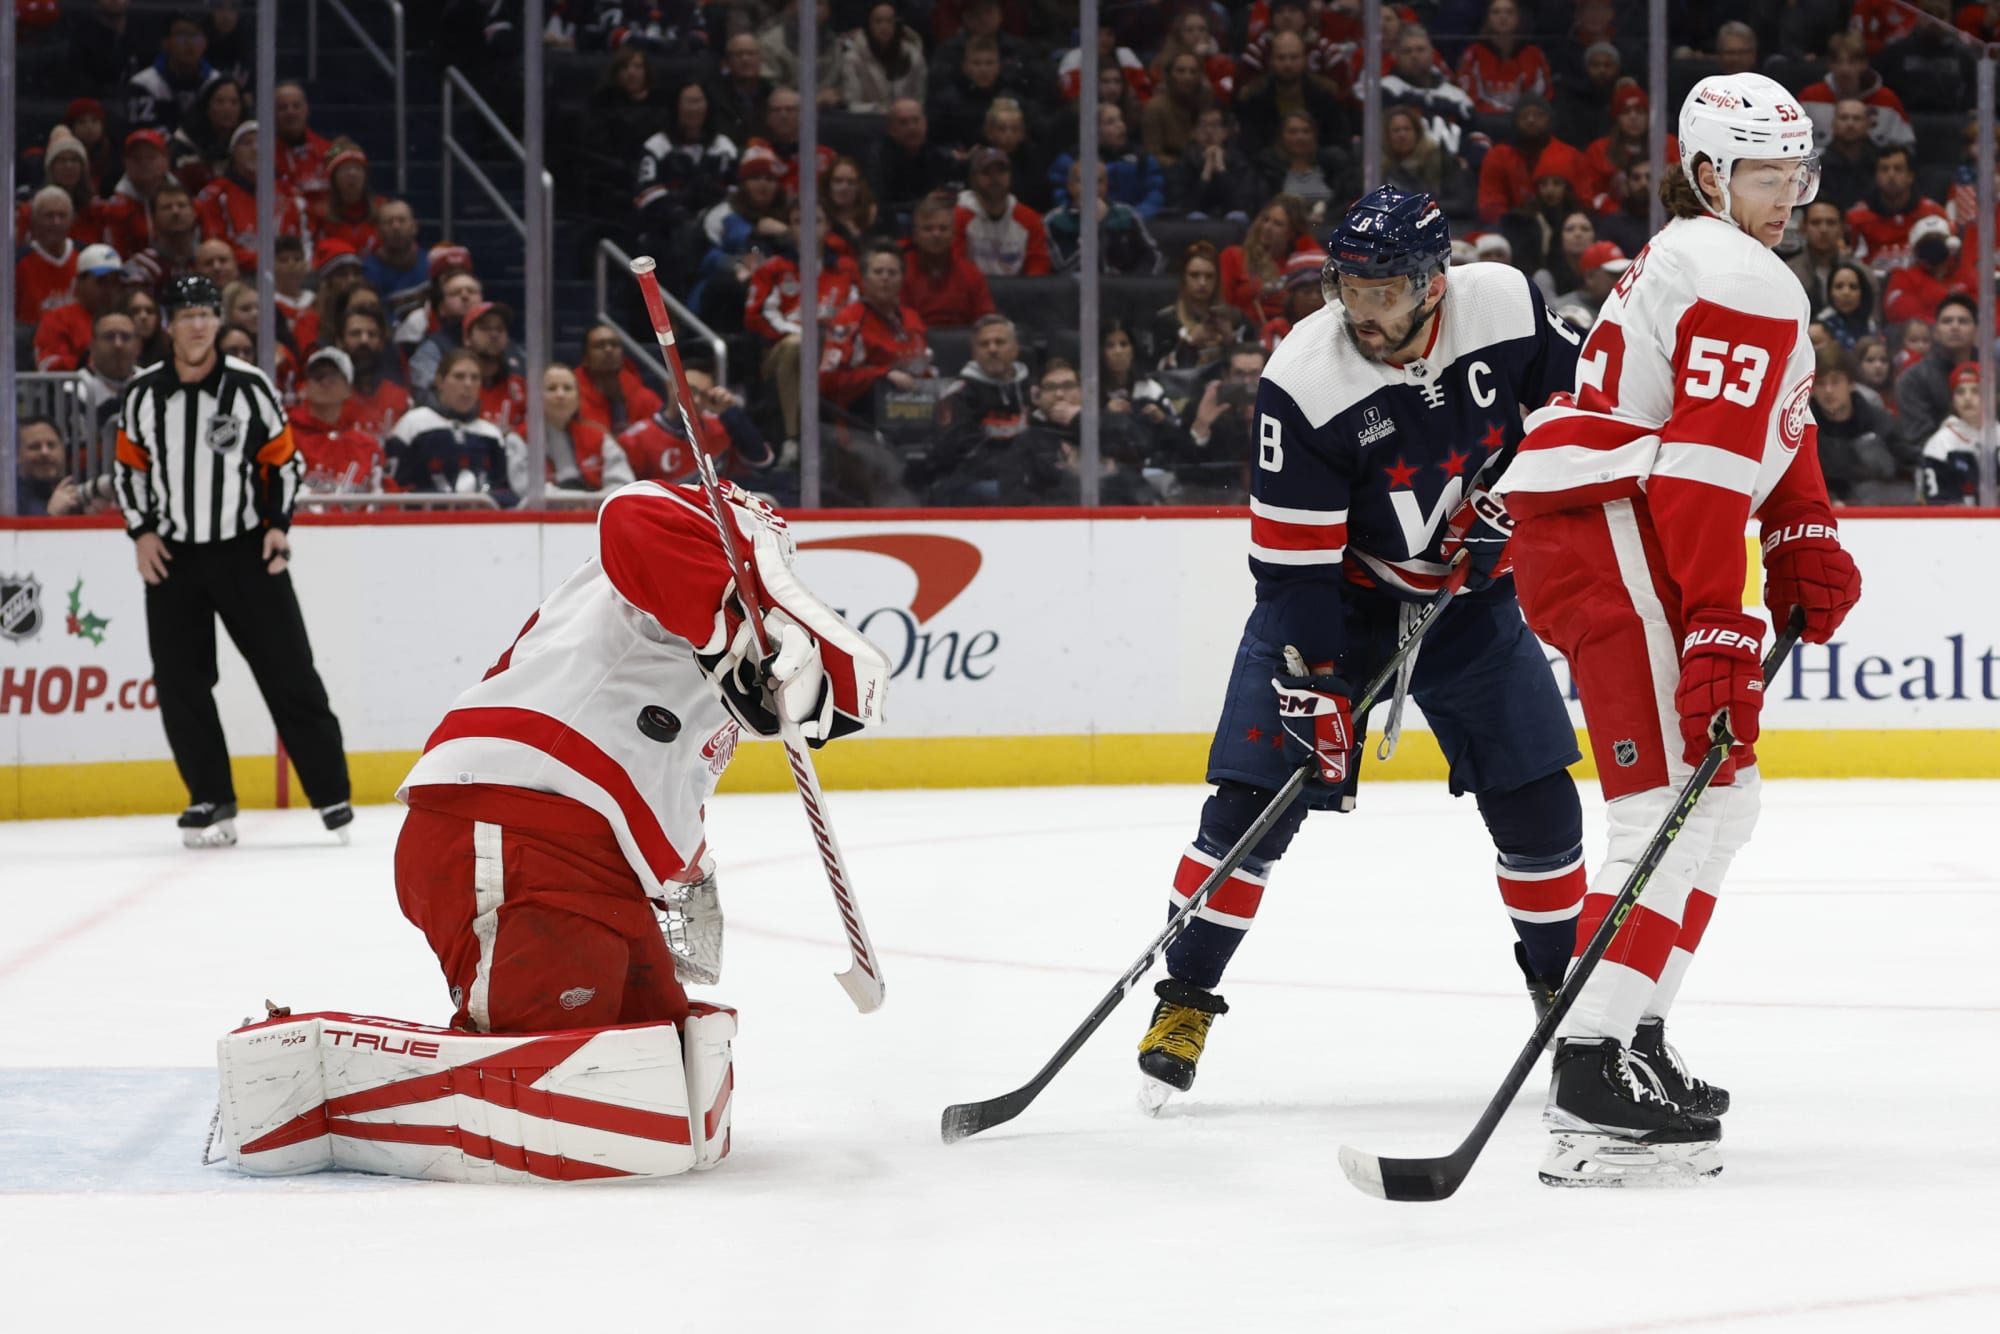 Detroit Red Wings lose to Washington Capitals, 1-0